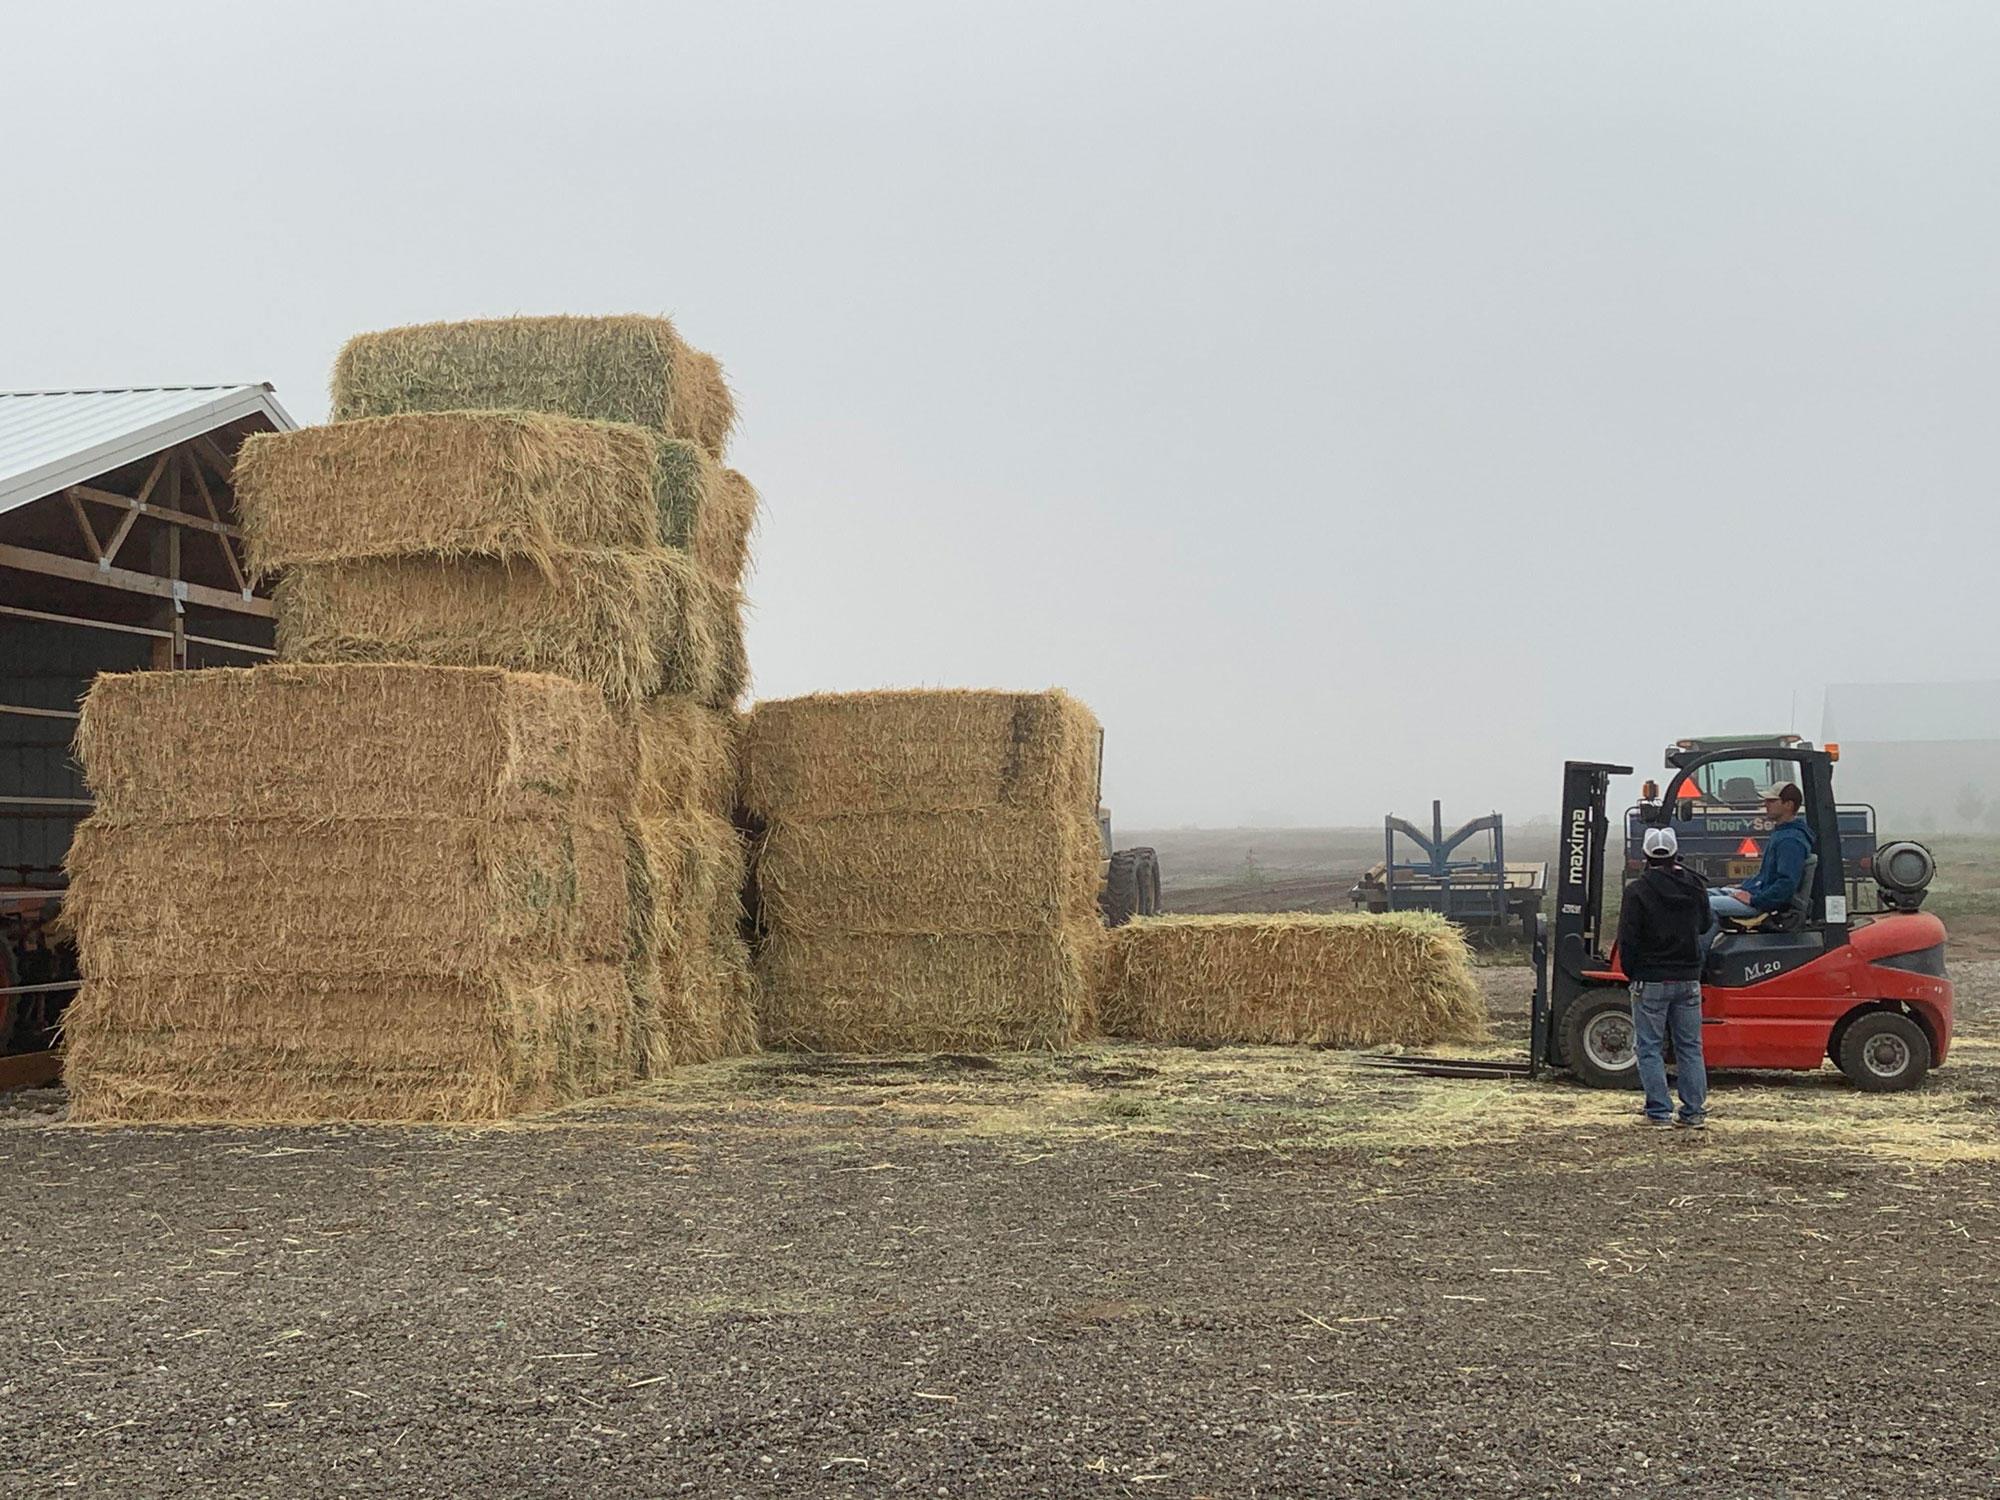 Donated hay stacked at the North Willamette Research and Extension Center.